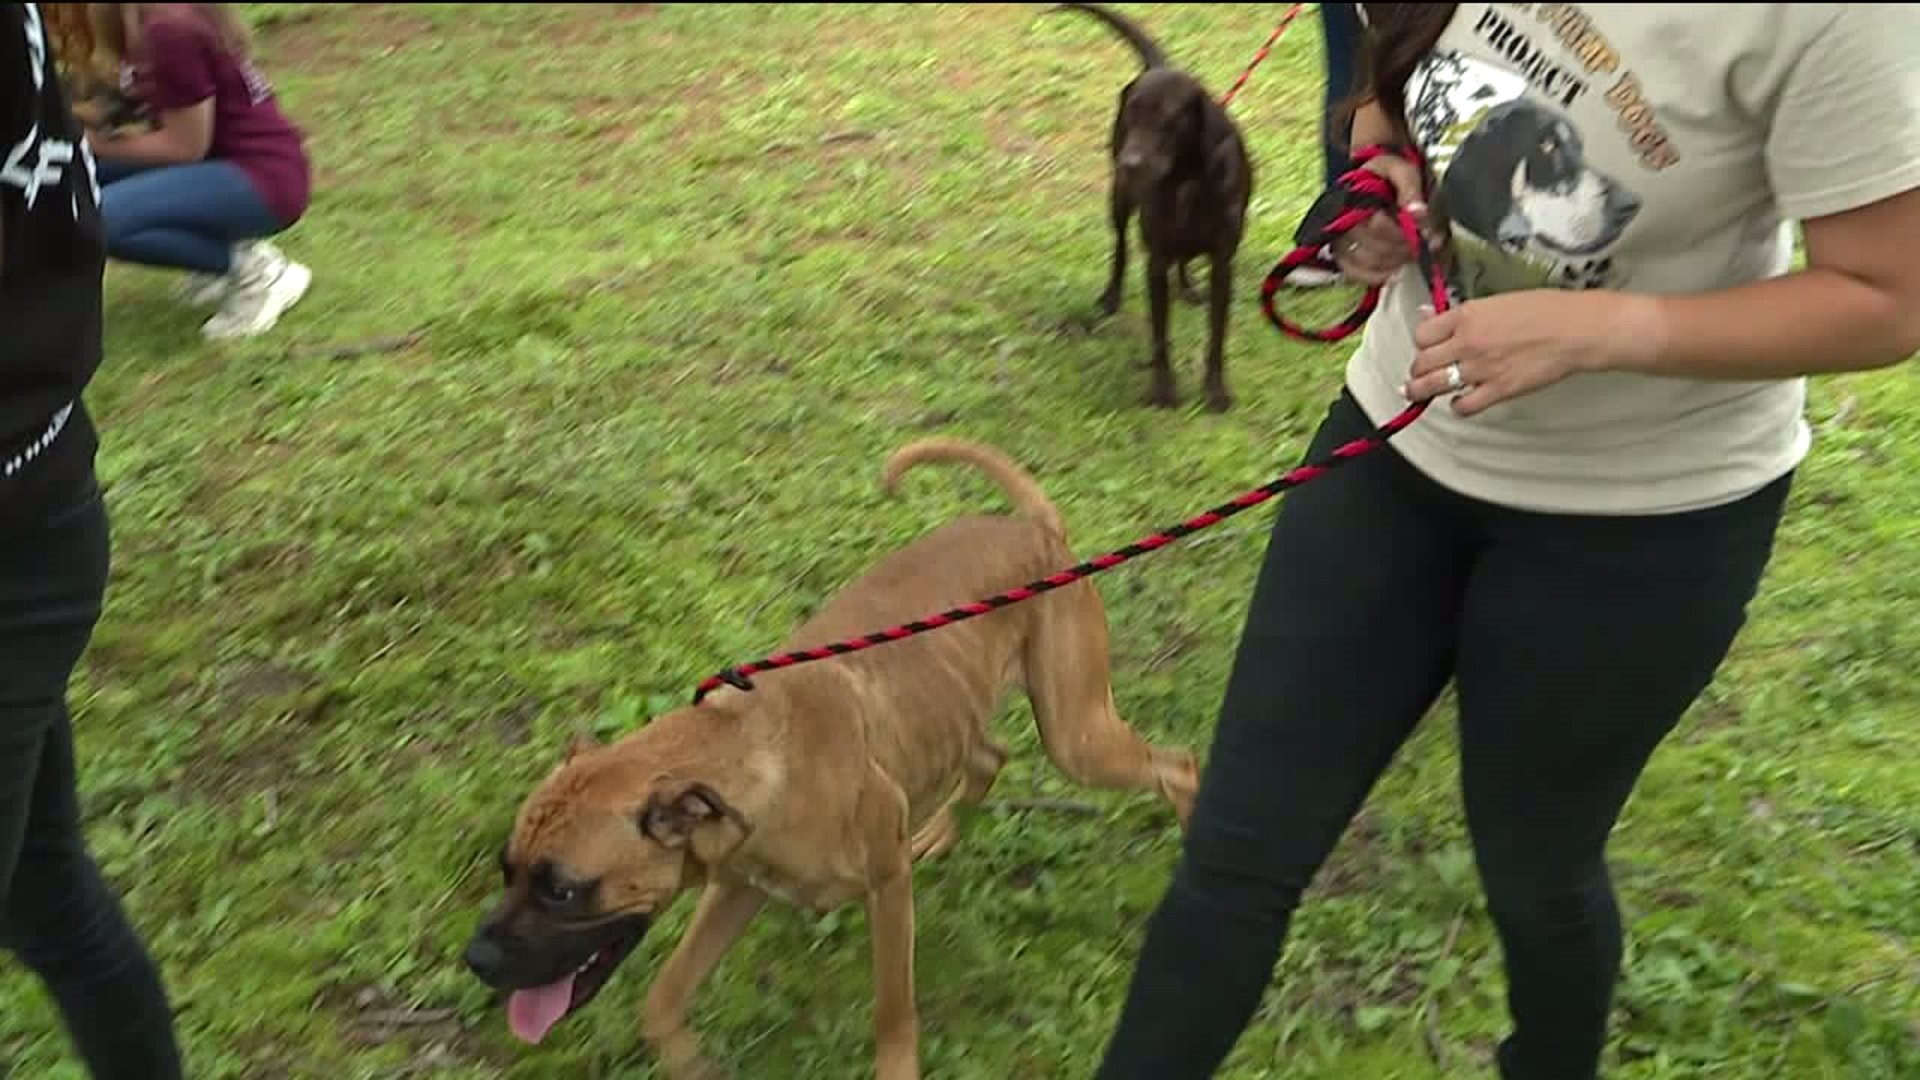 Popular Show 'Pit Bulls and Parolees' Shoots Episode in Schuylkill County